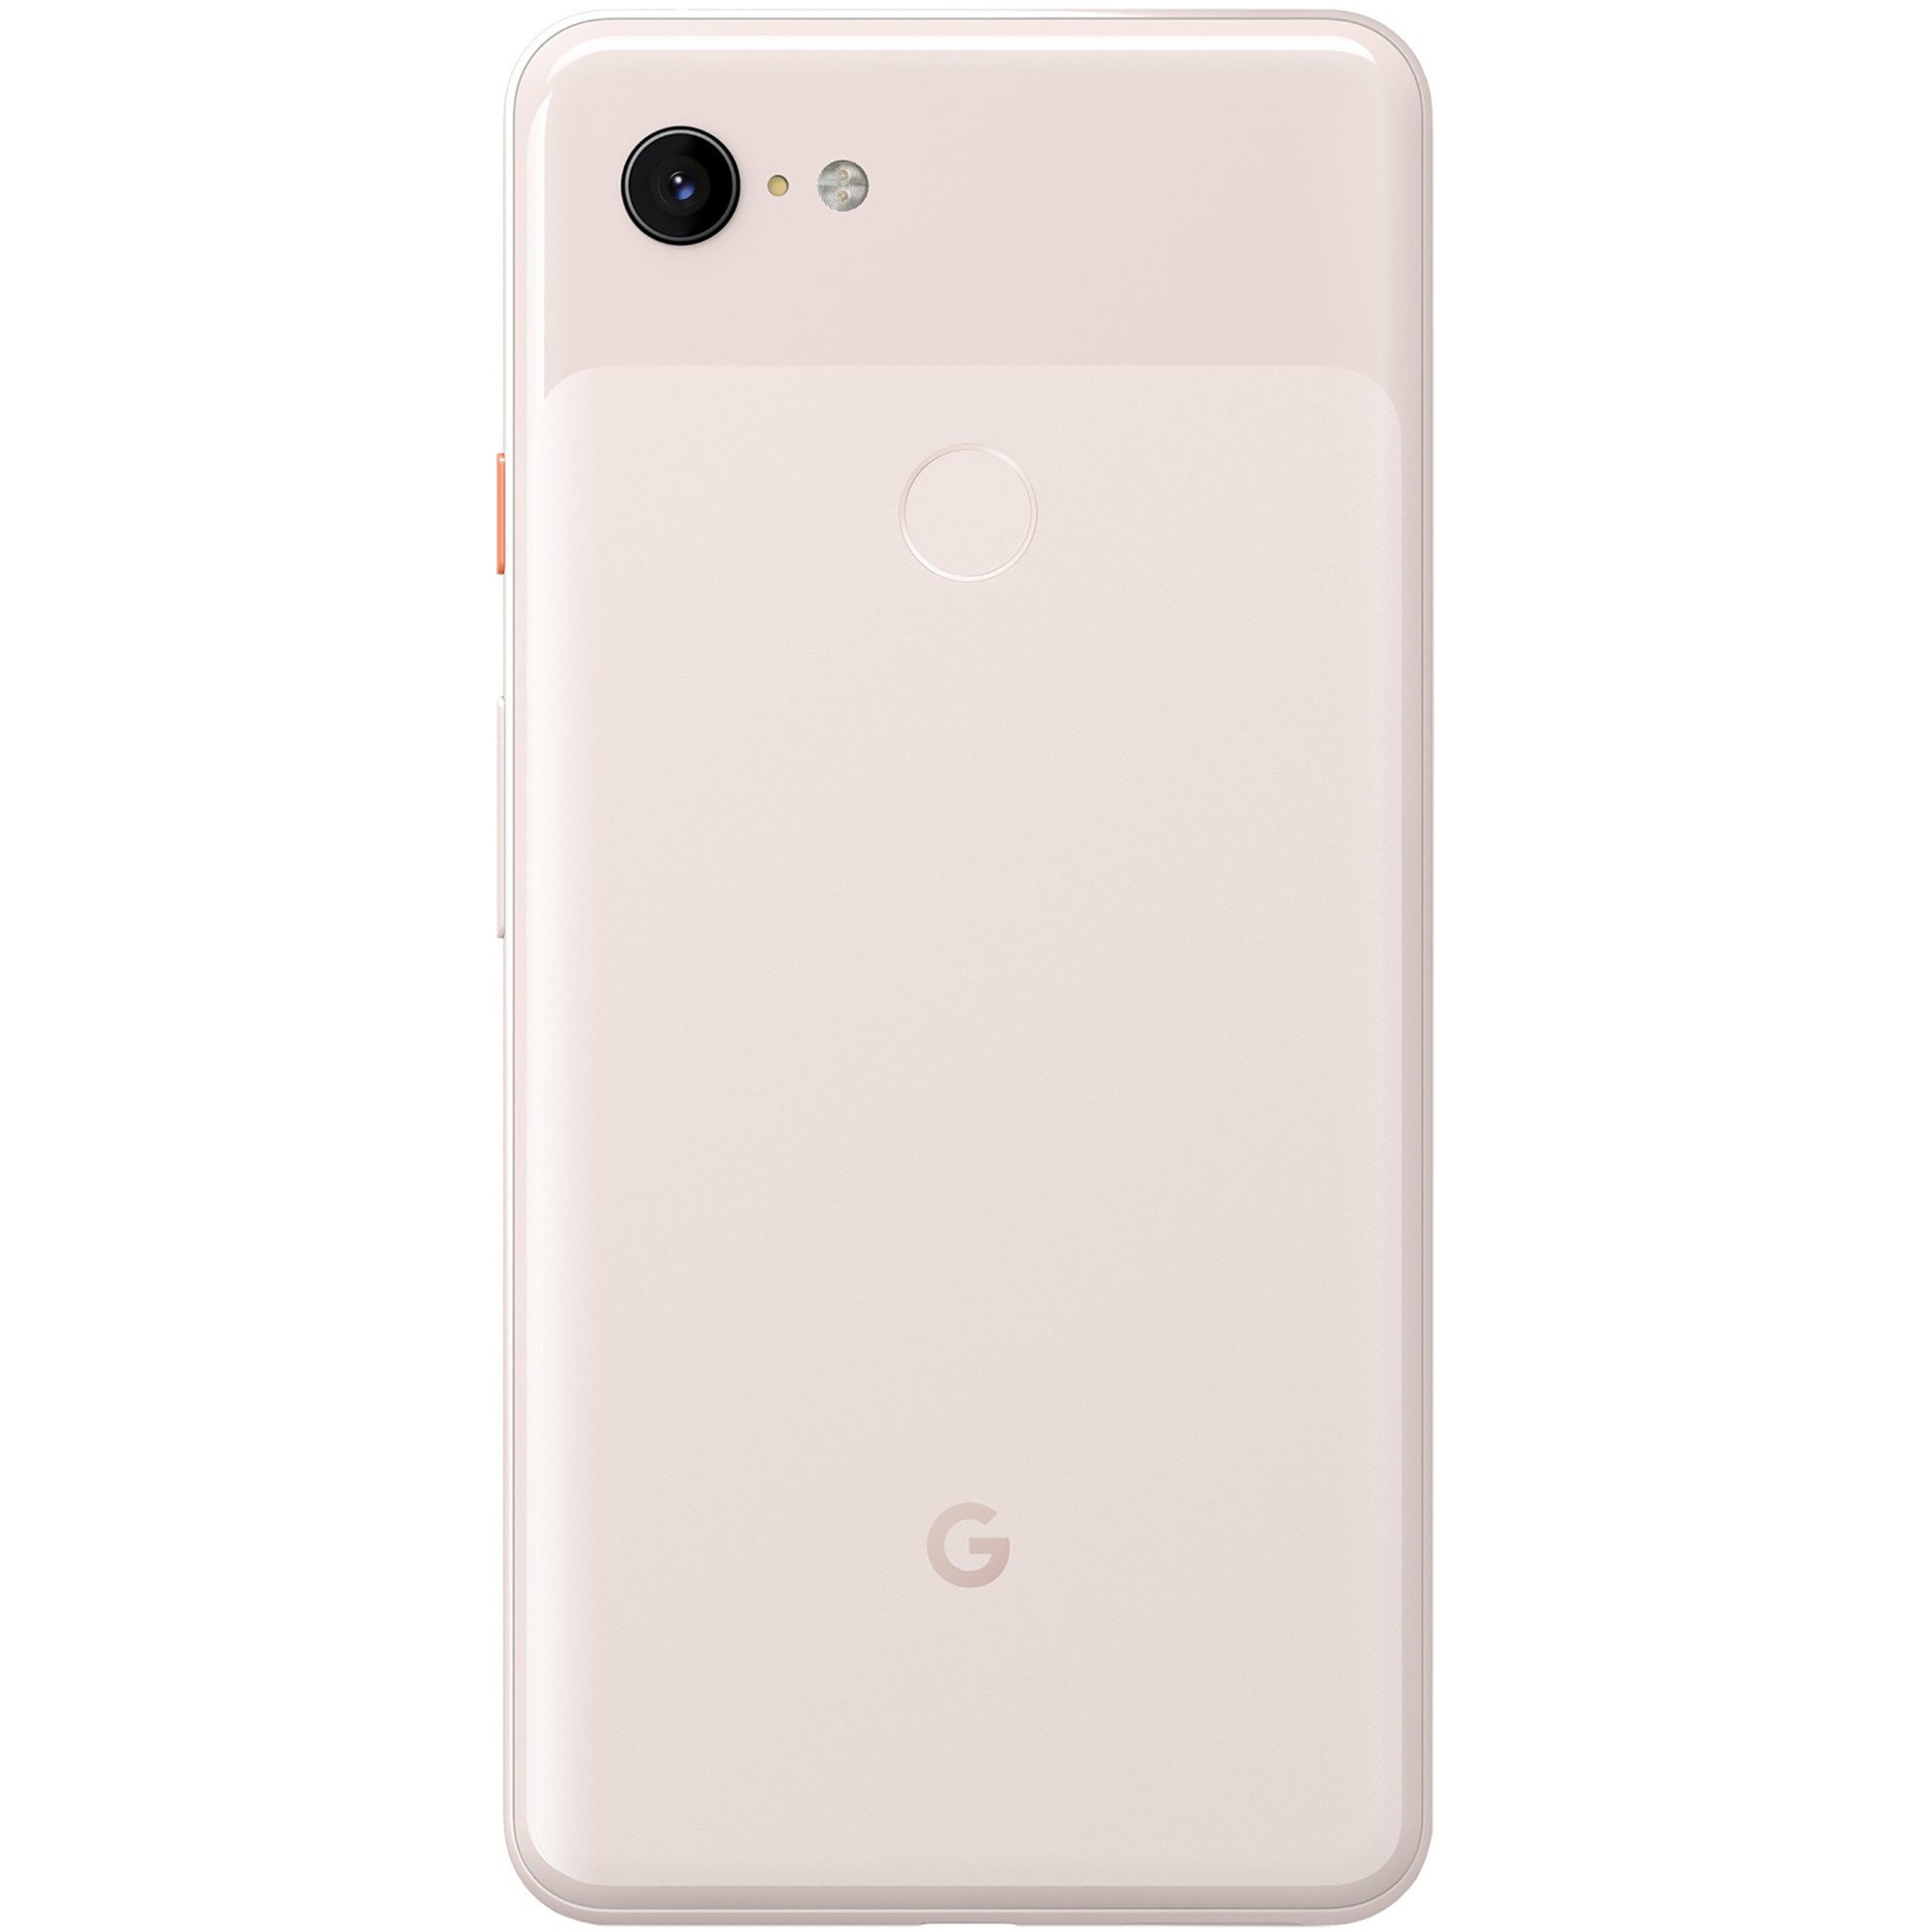 Google Pixel 3XL 64GB Pink (Unlocked) Excellent Condition - image 2 of 4